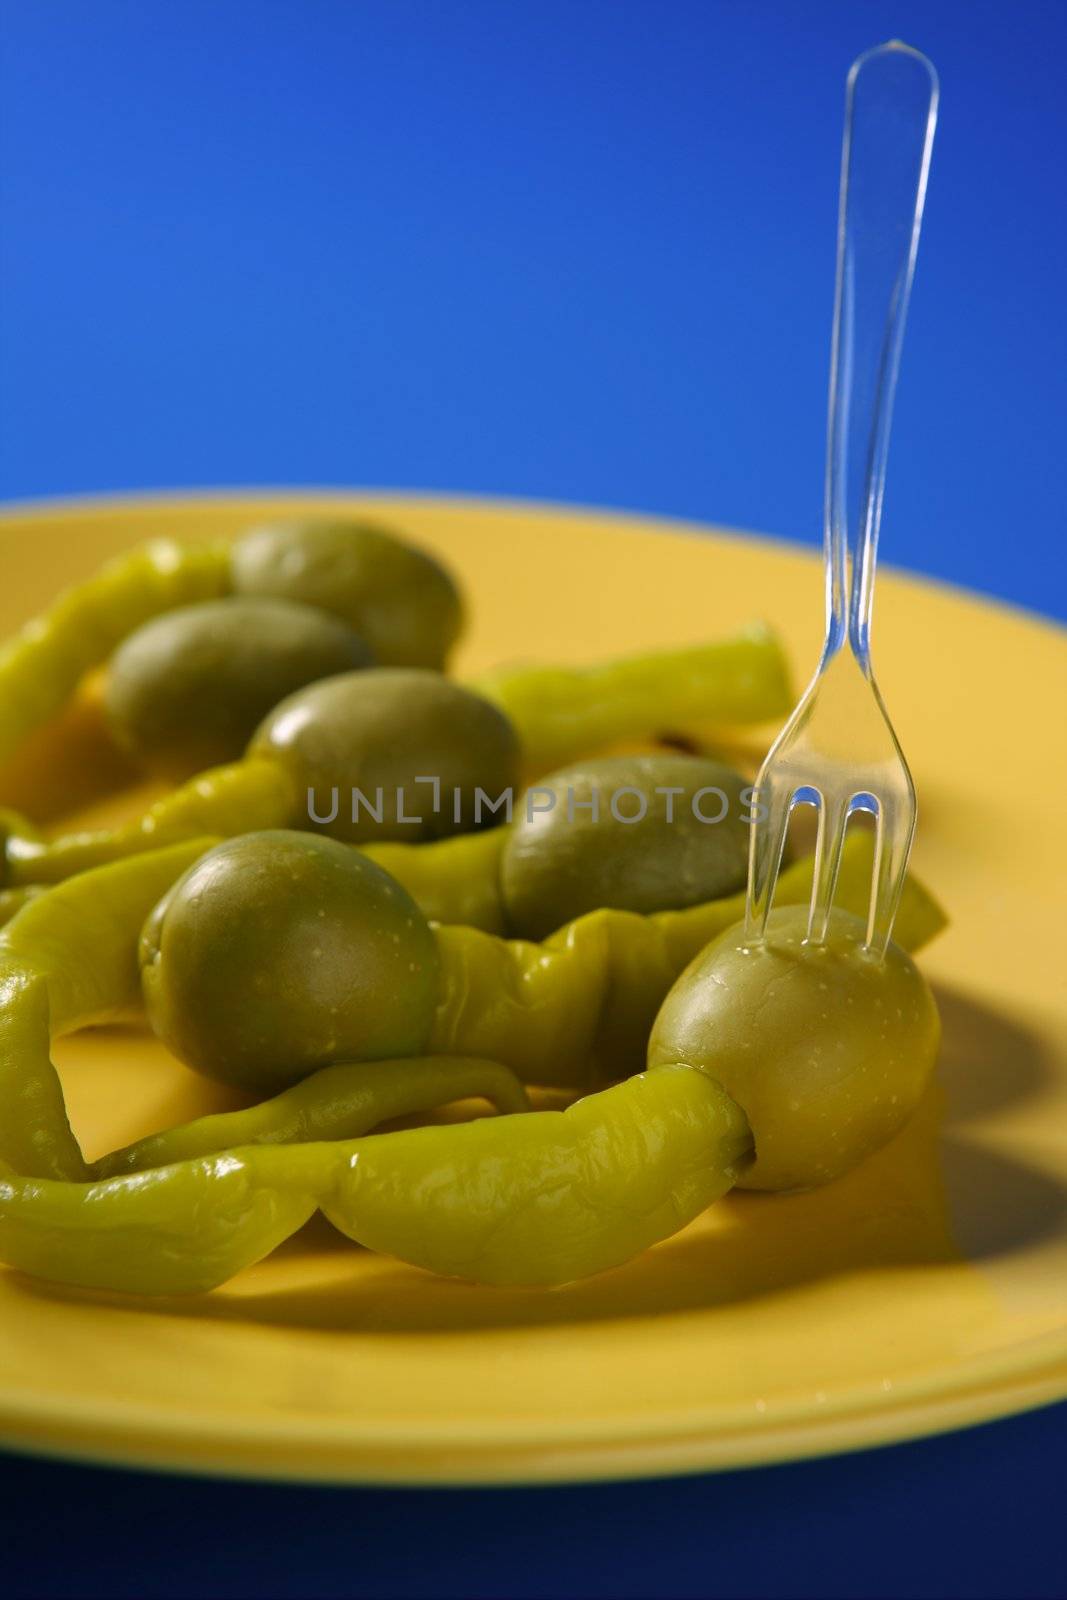 Tapas from Spain, olives and hot green pepper snack